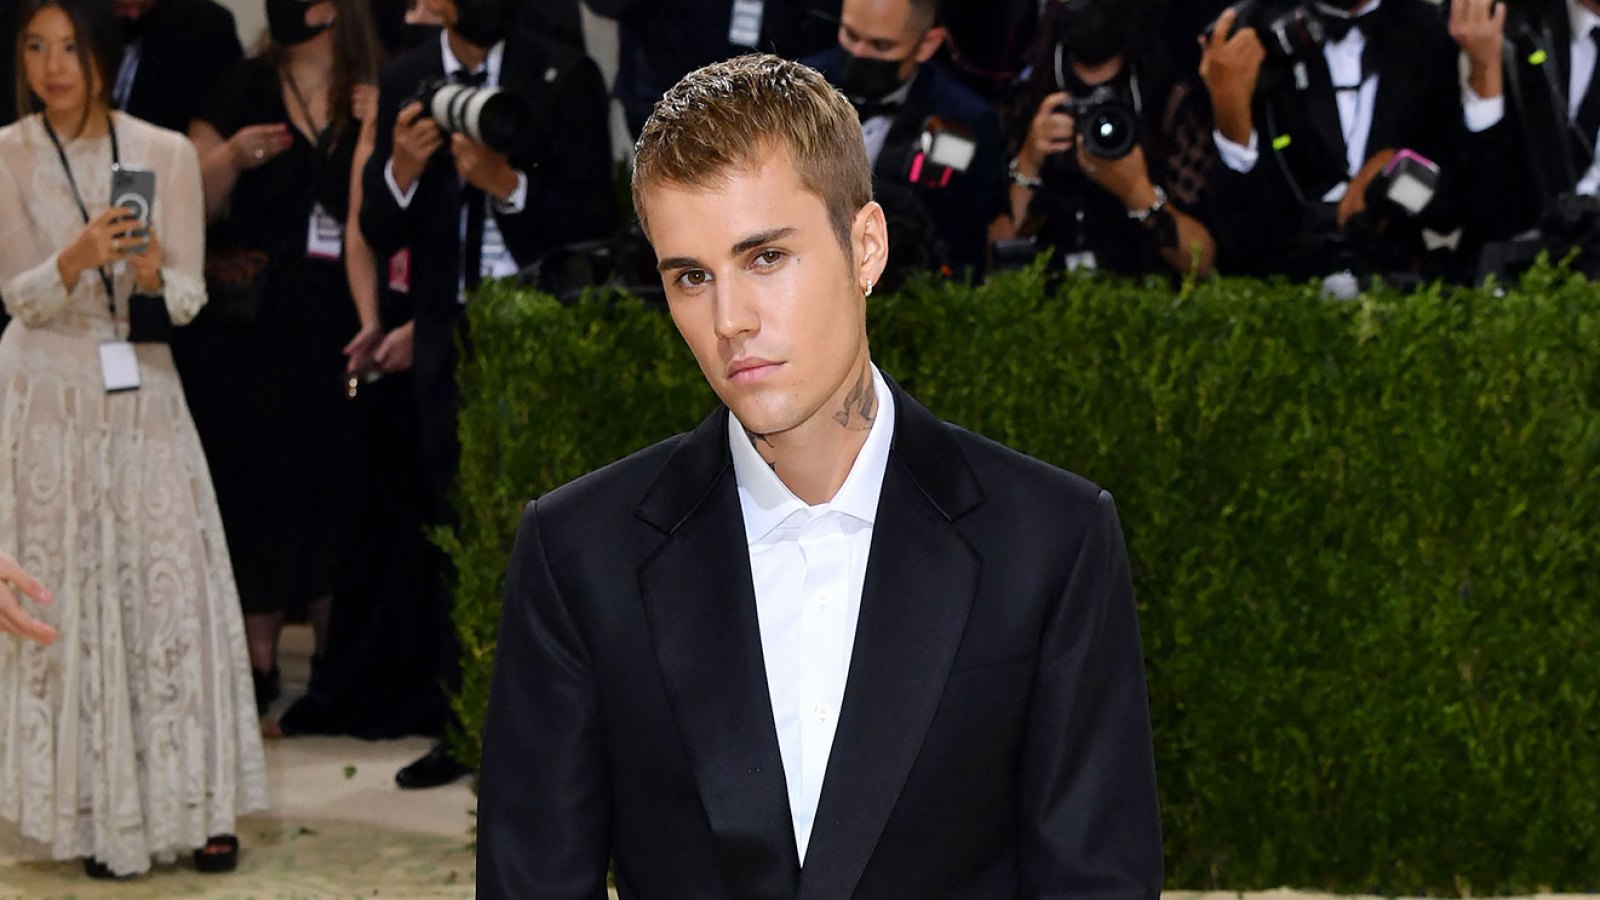 Feature Justin Bieber Bought A 16 Million California Mansion Near Kylie Jenner and Kris Jenner